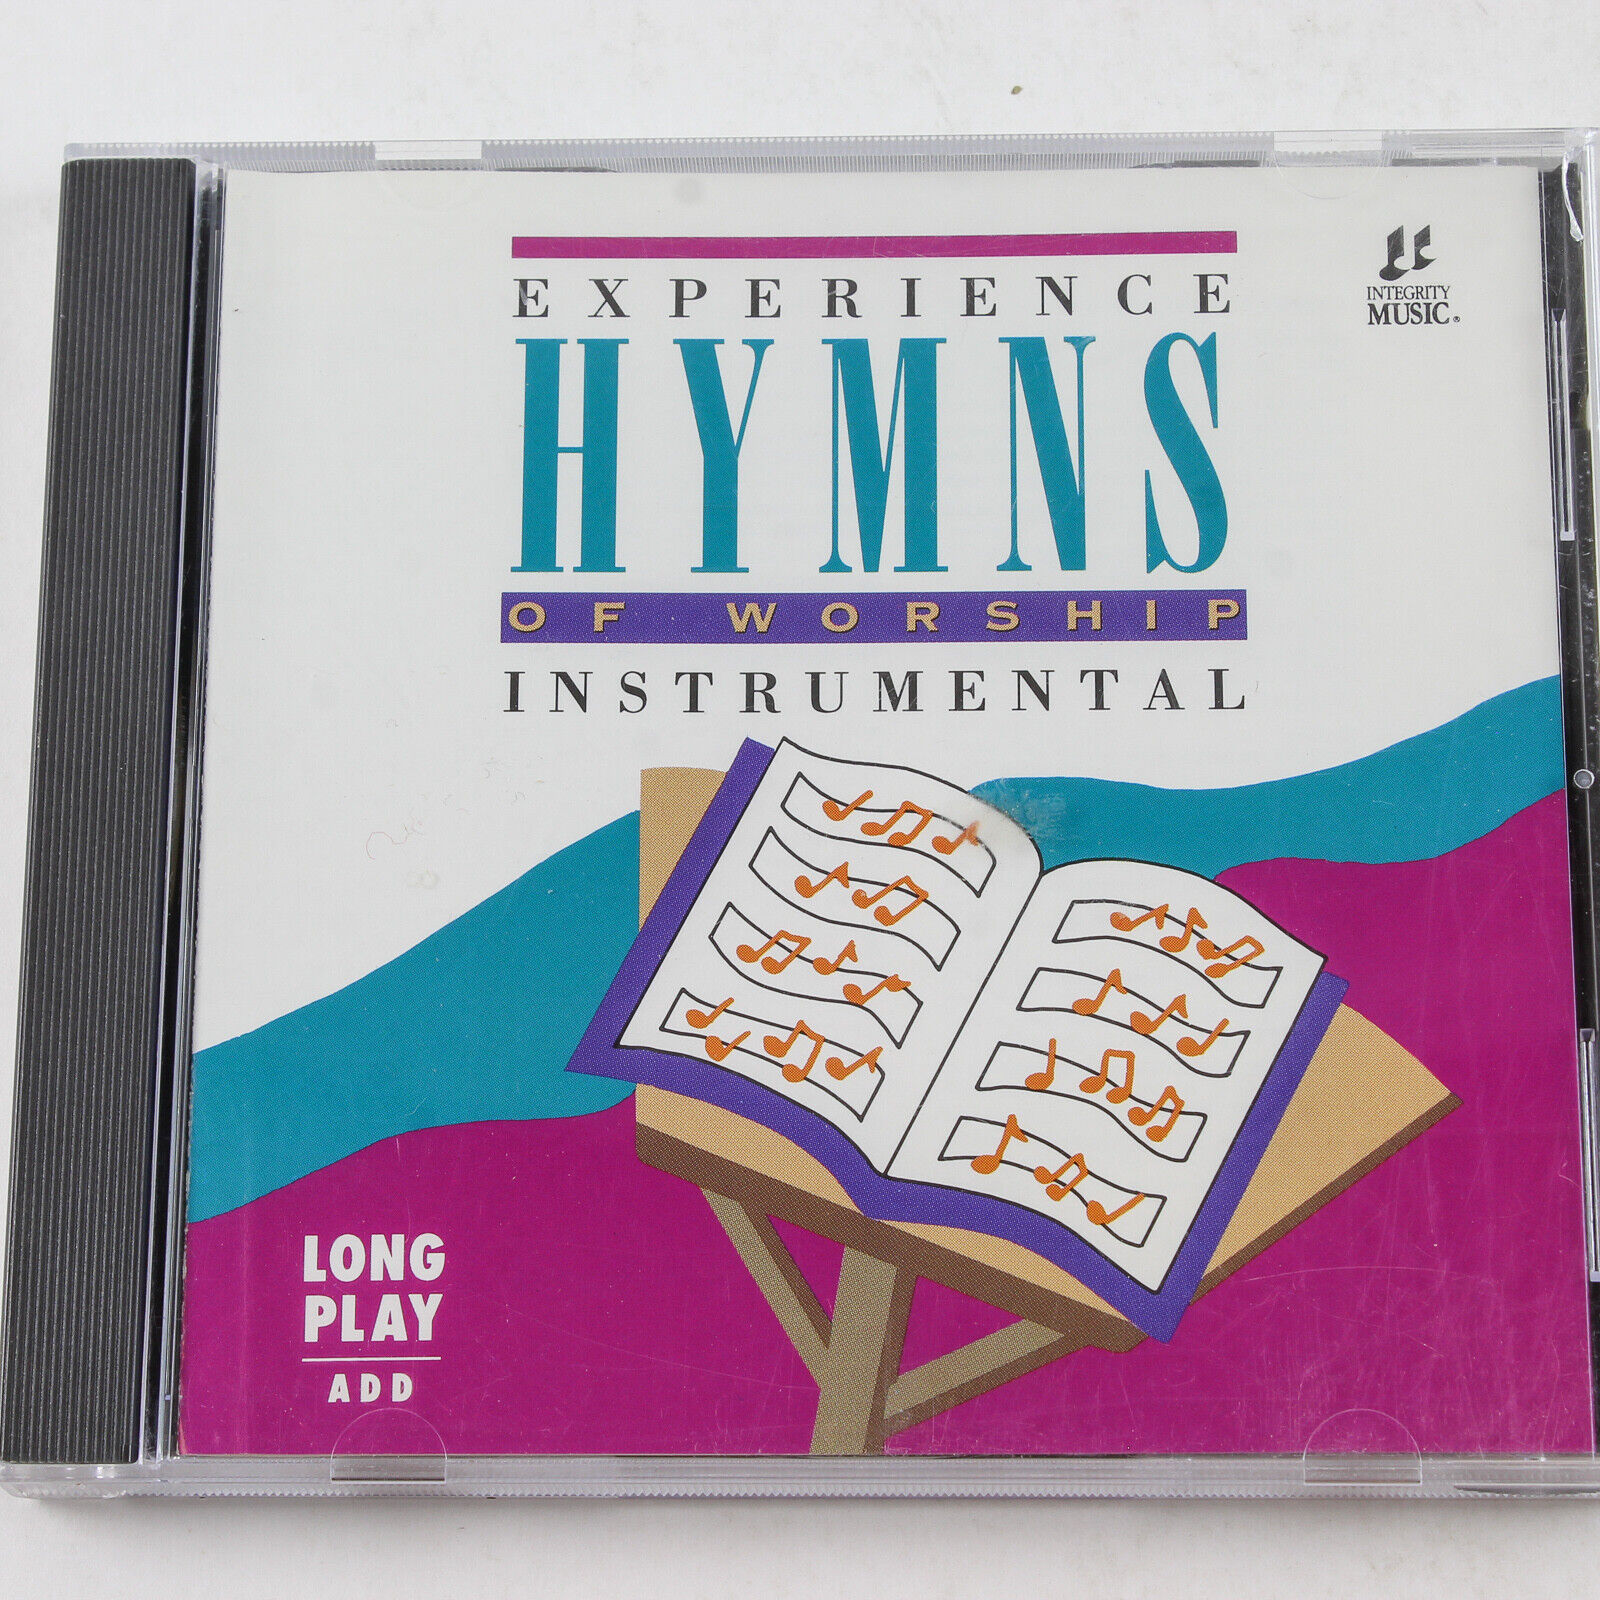 Experience Hymns of Worship Instrumental Interludes CD 1992 Integrity Music